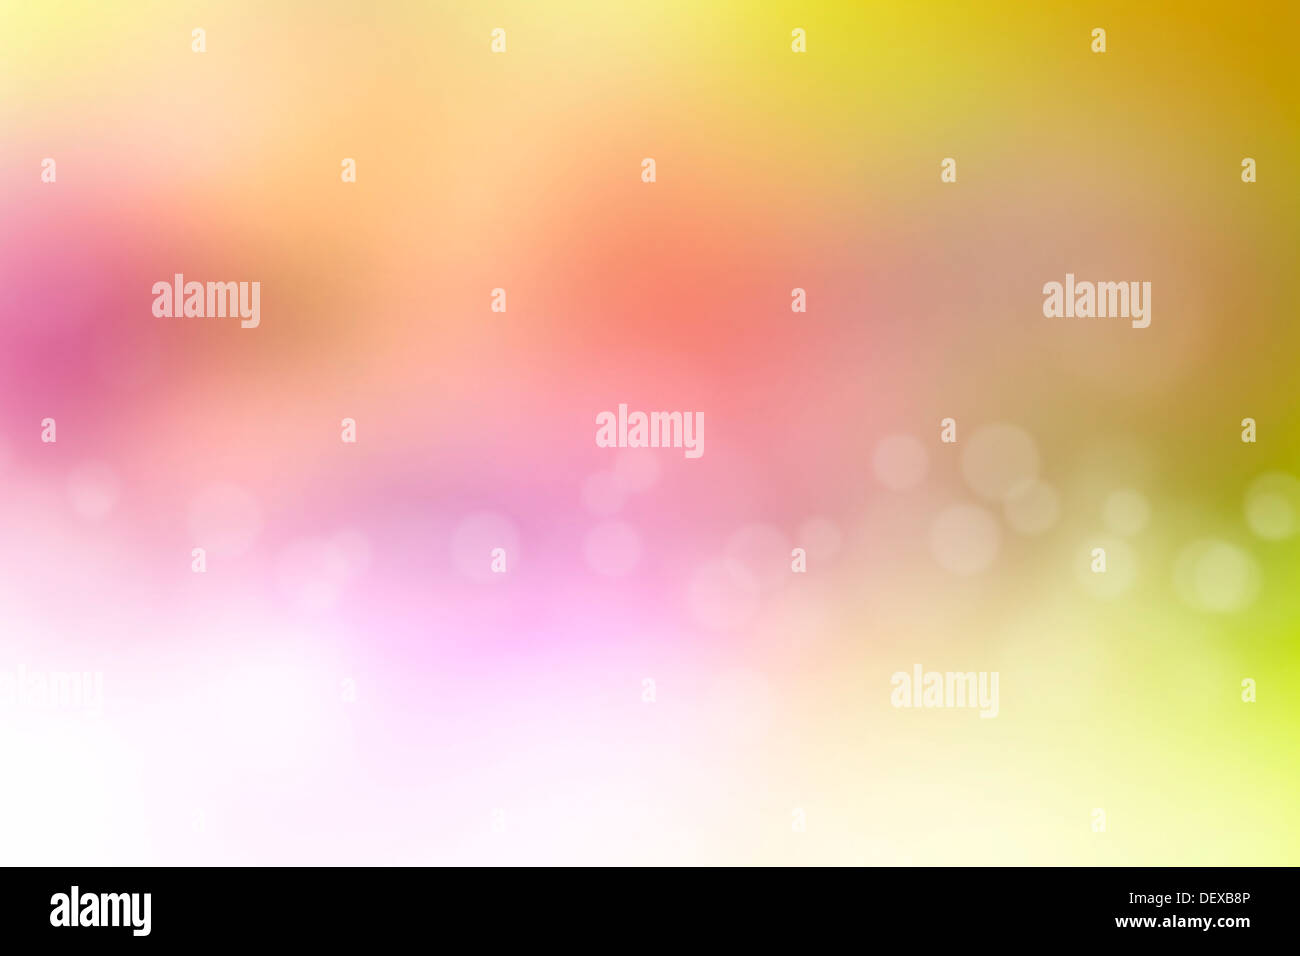 Abstract colorful background. Blank copy space for advertising Stock Photo